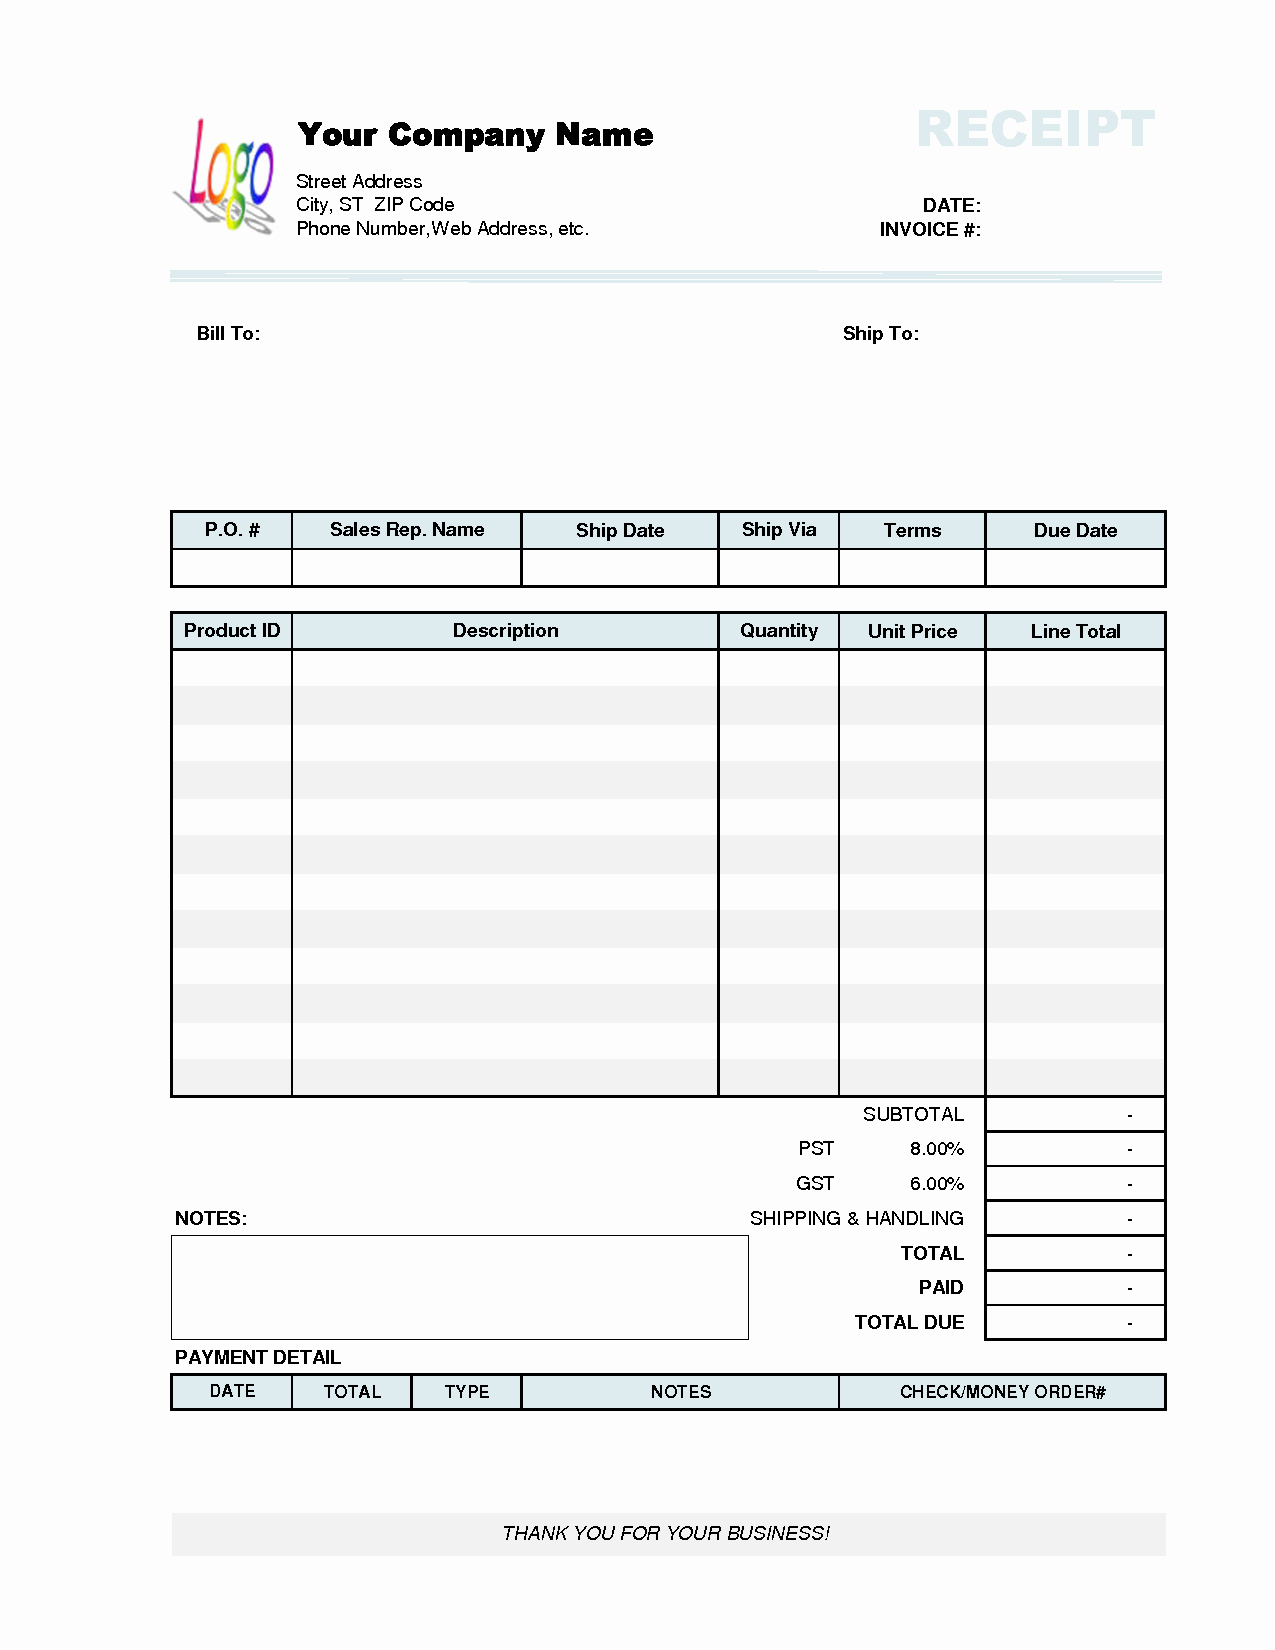 Excel Invoice Template 2003 Best Of Download Microsoft Fice 2003 Receipt Templates